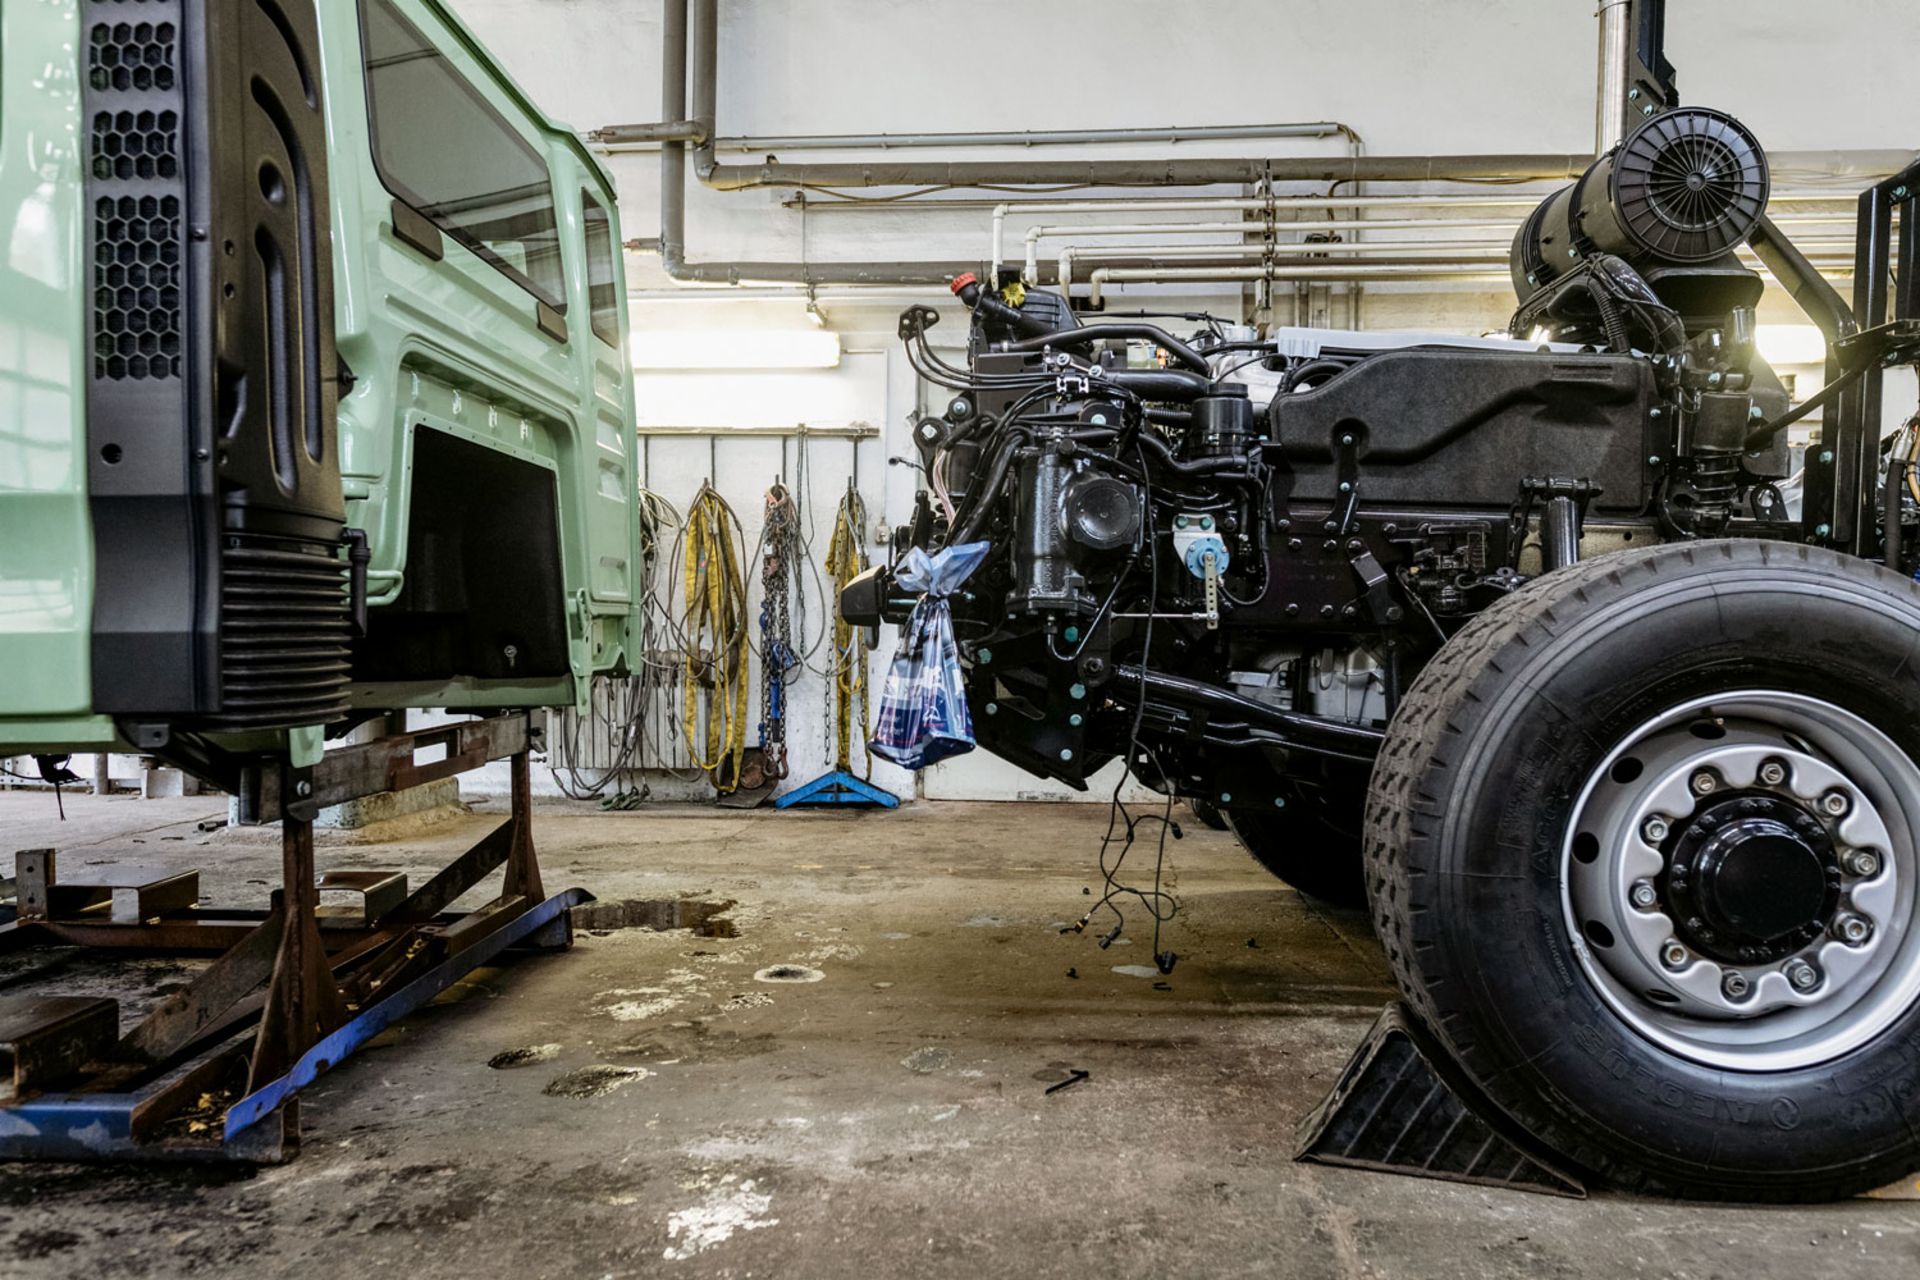 In the workshop – The truck's cab, chassis and superstructure are broken down into multiple parts.